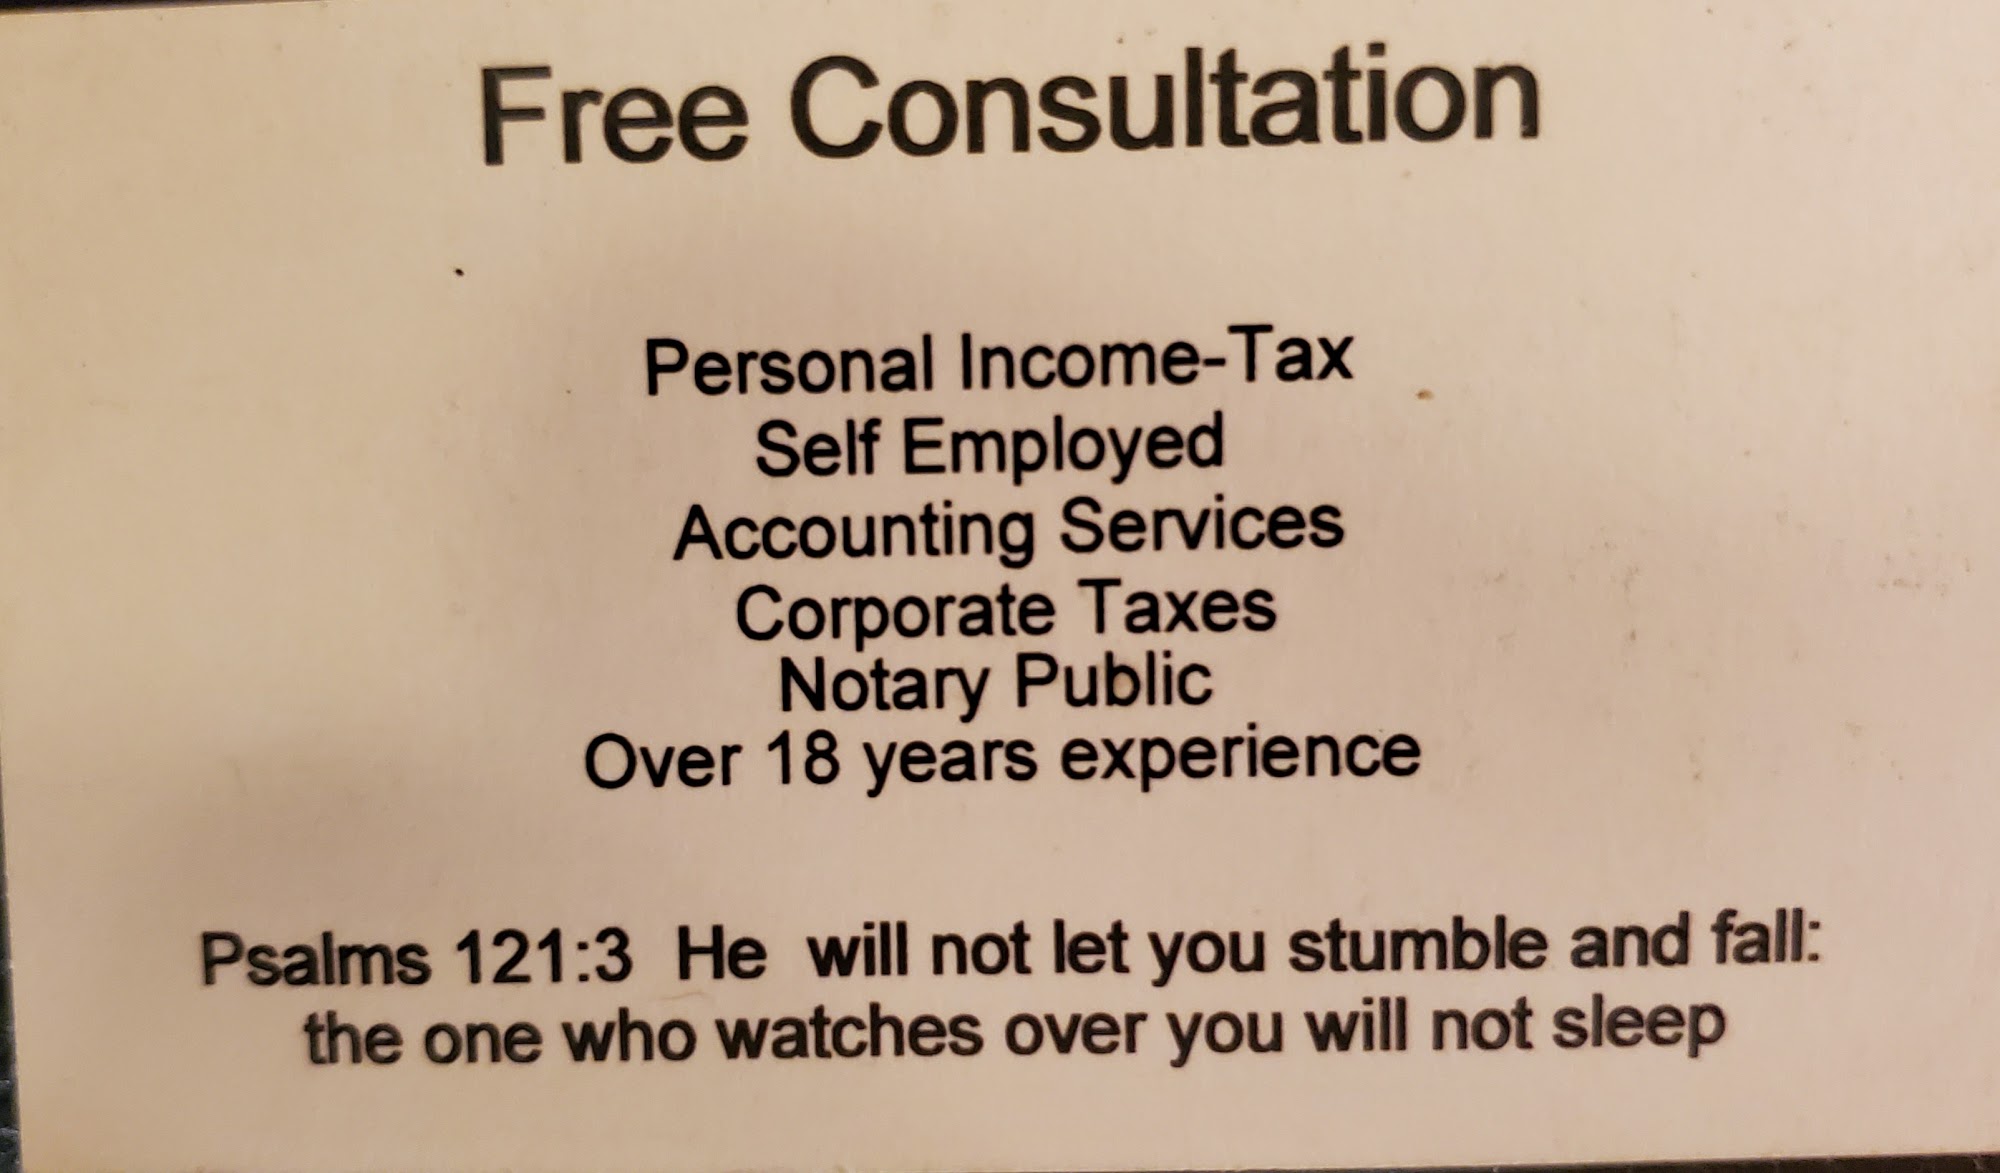 NC Tax Services